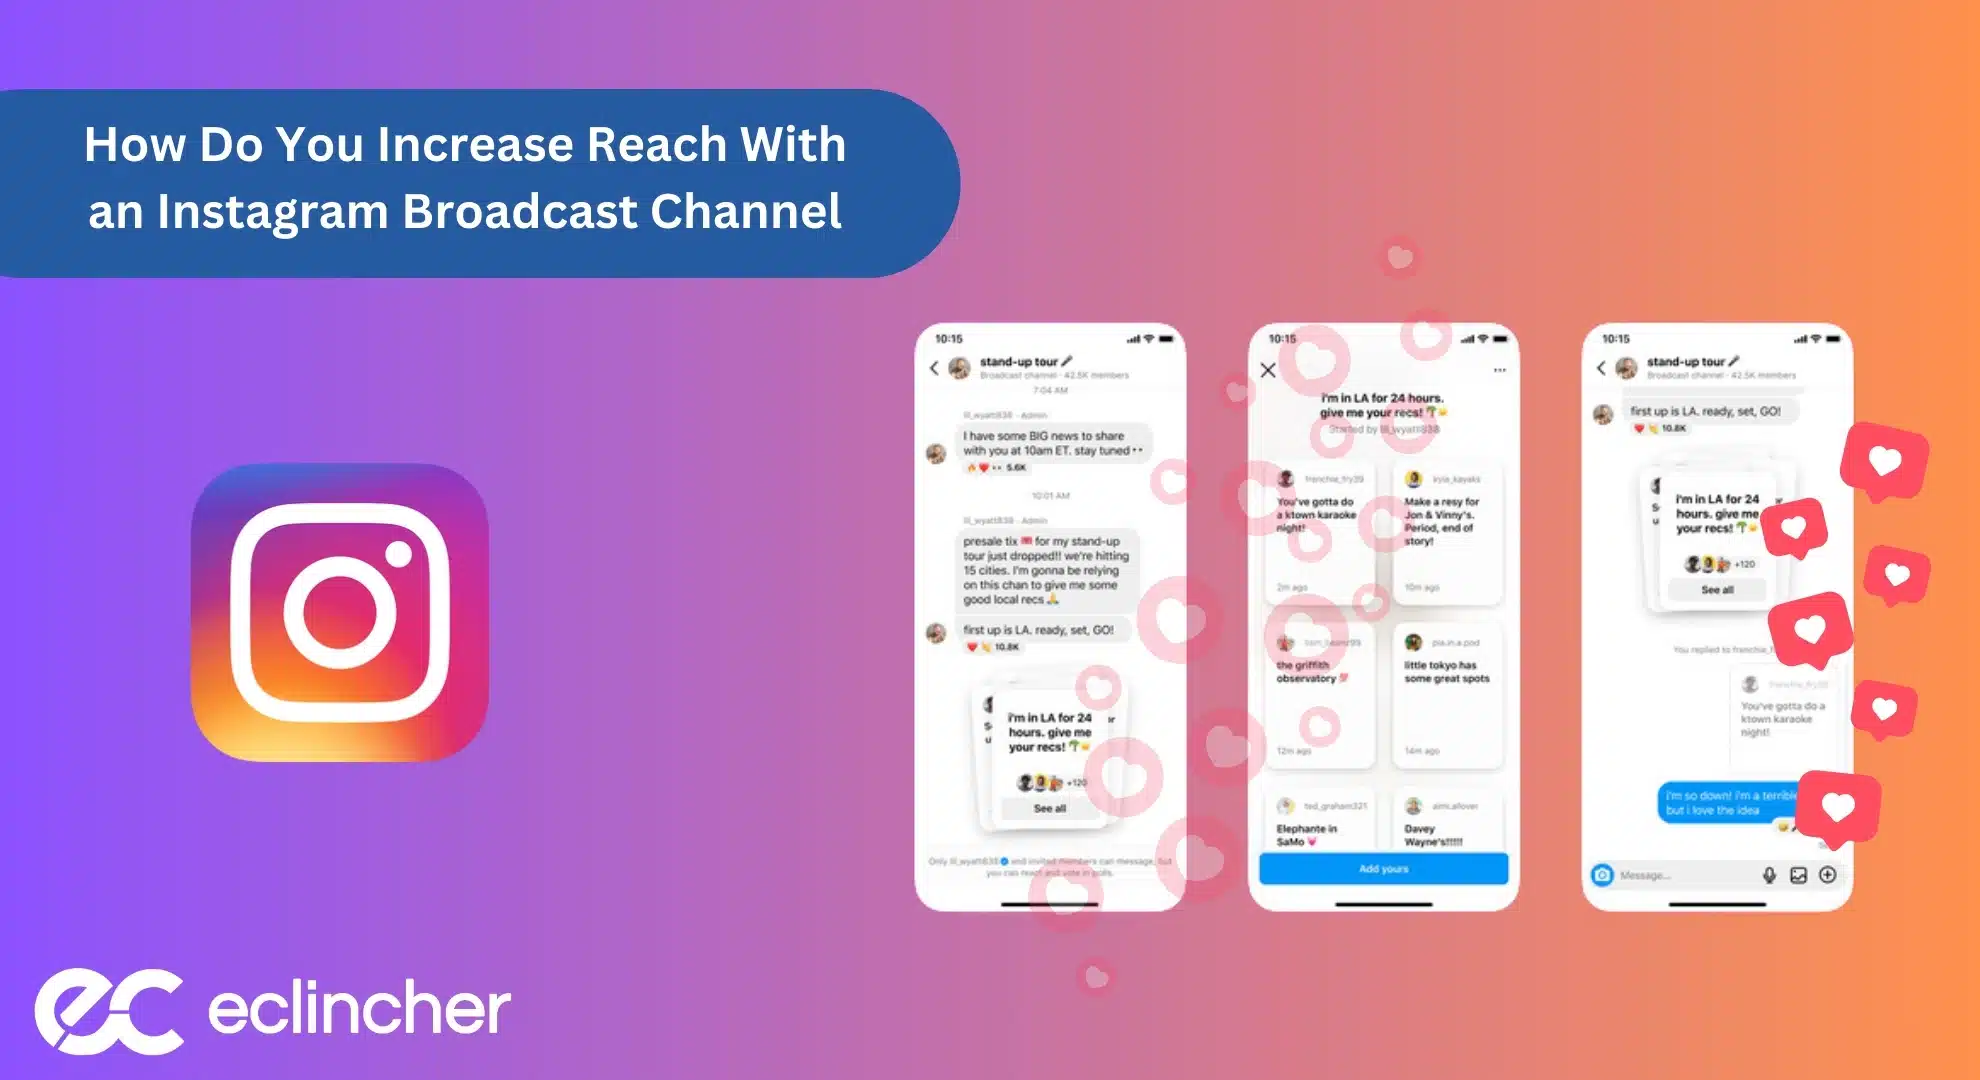 How Do You Increase Reach With an Instagram Broadcast Channel